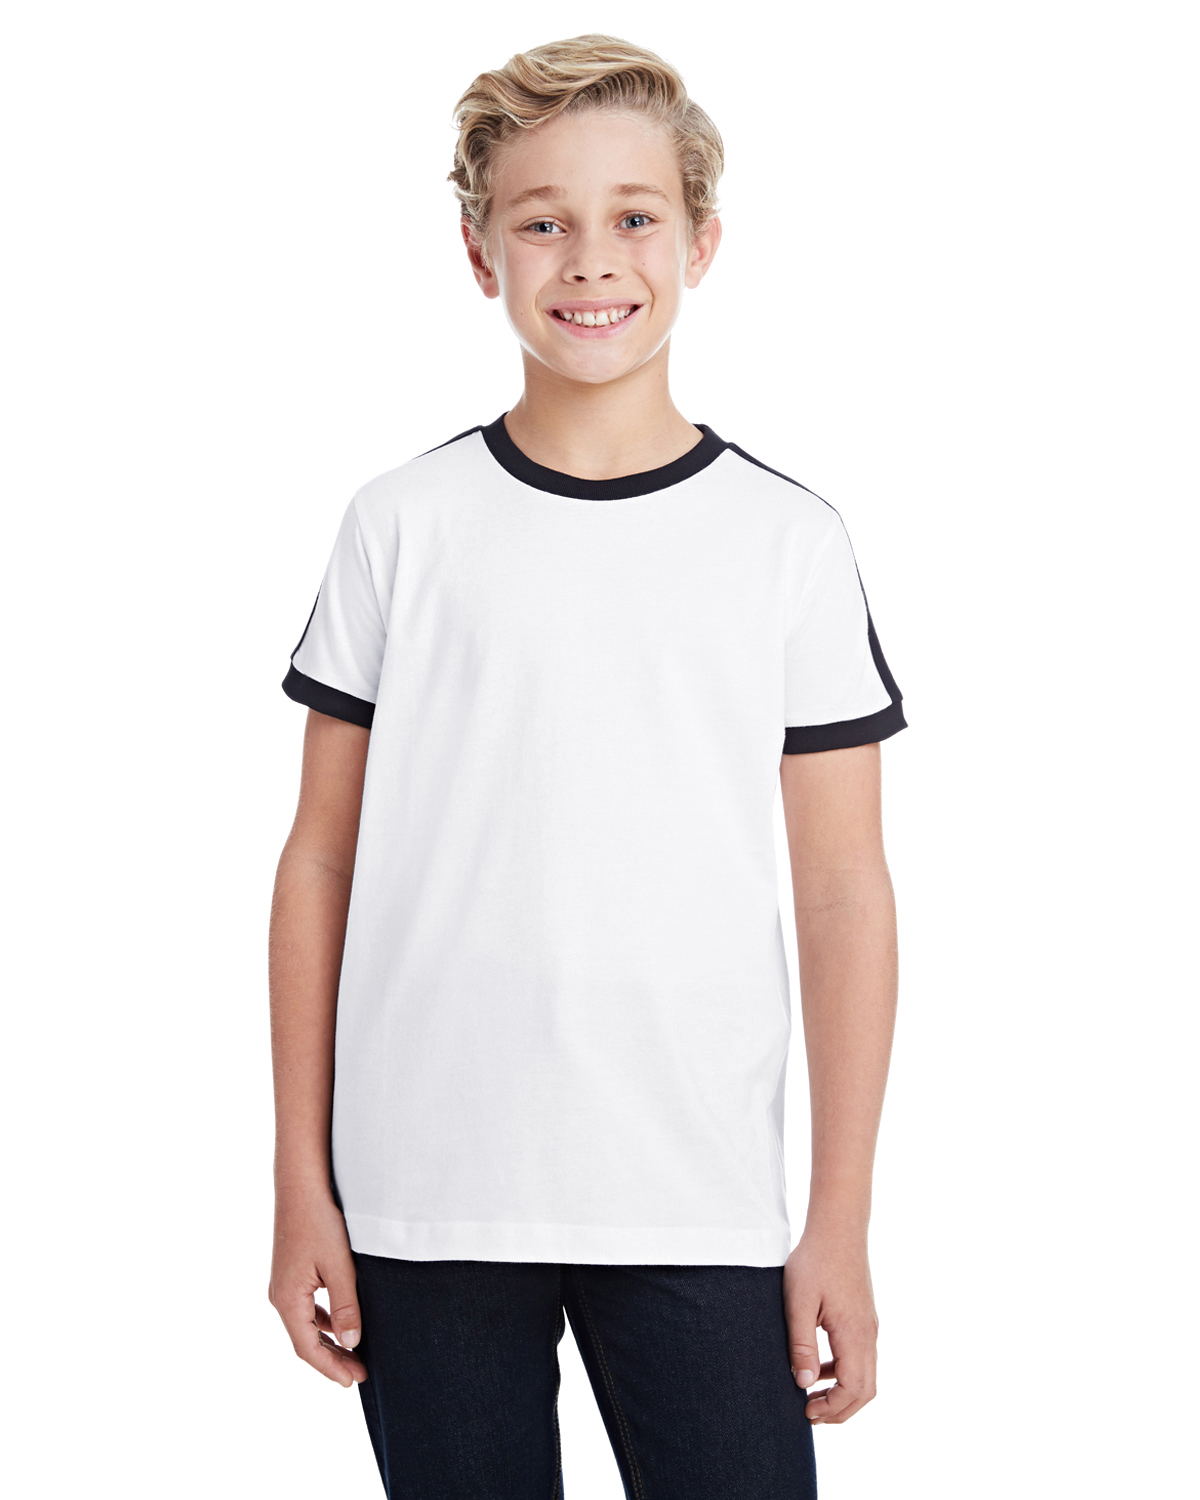 LAT 6132 - Youth Soccer Ringer Fine Jersey T-Shirt